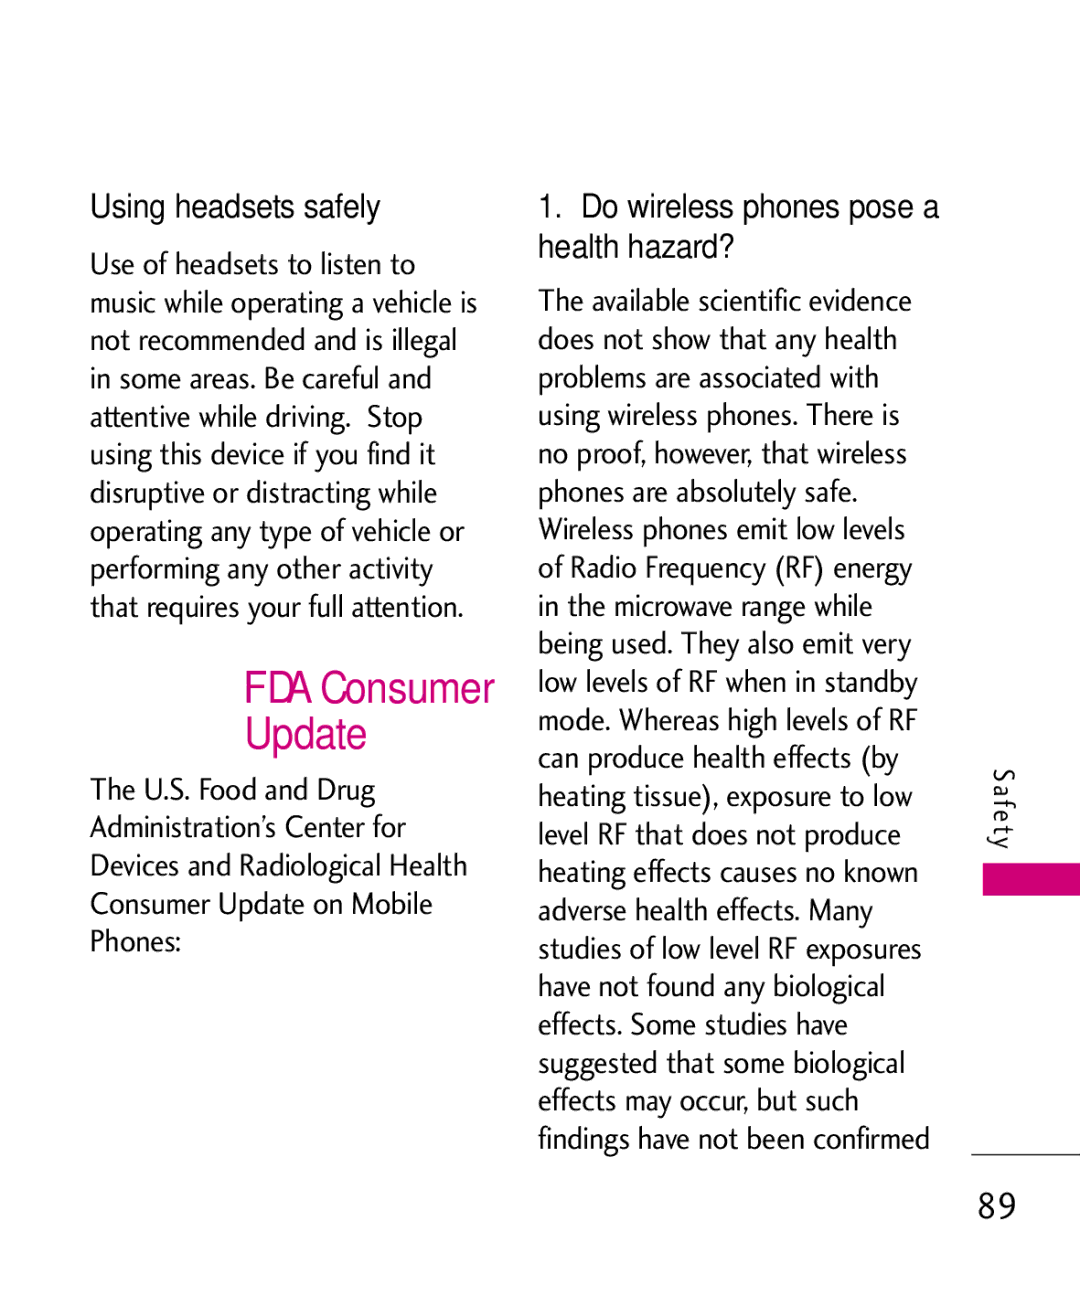 LG Electronics UN200 manual FDA Consumer Update, Using headsets safely, Do wireless phones pose a health hazard? 